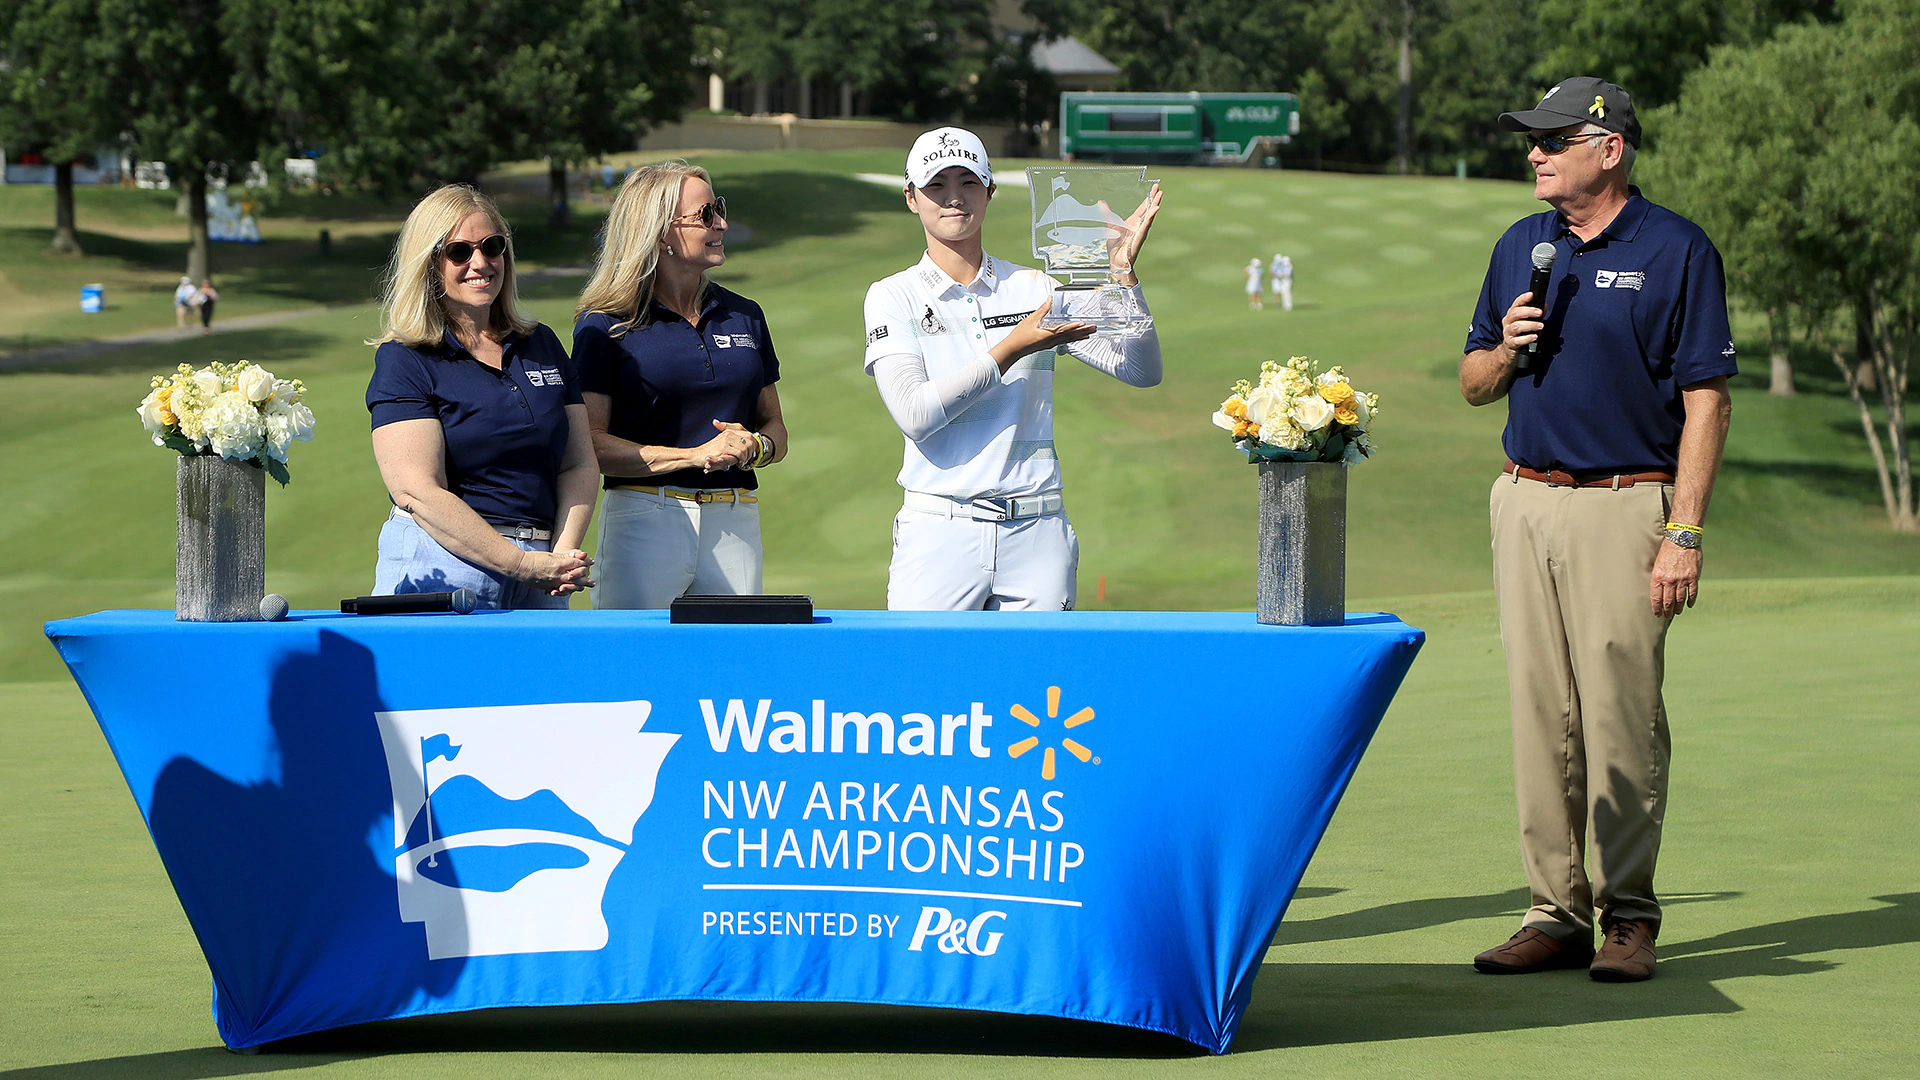 Walmart NW Arkansas is the latest LPGA event to proceed without fans